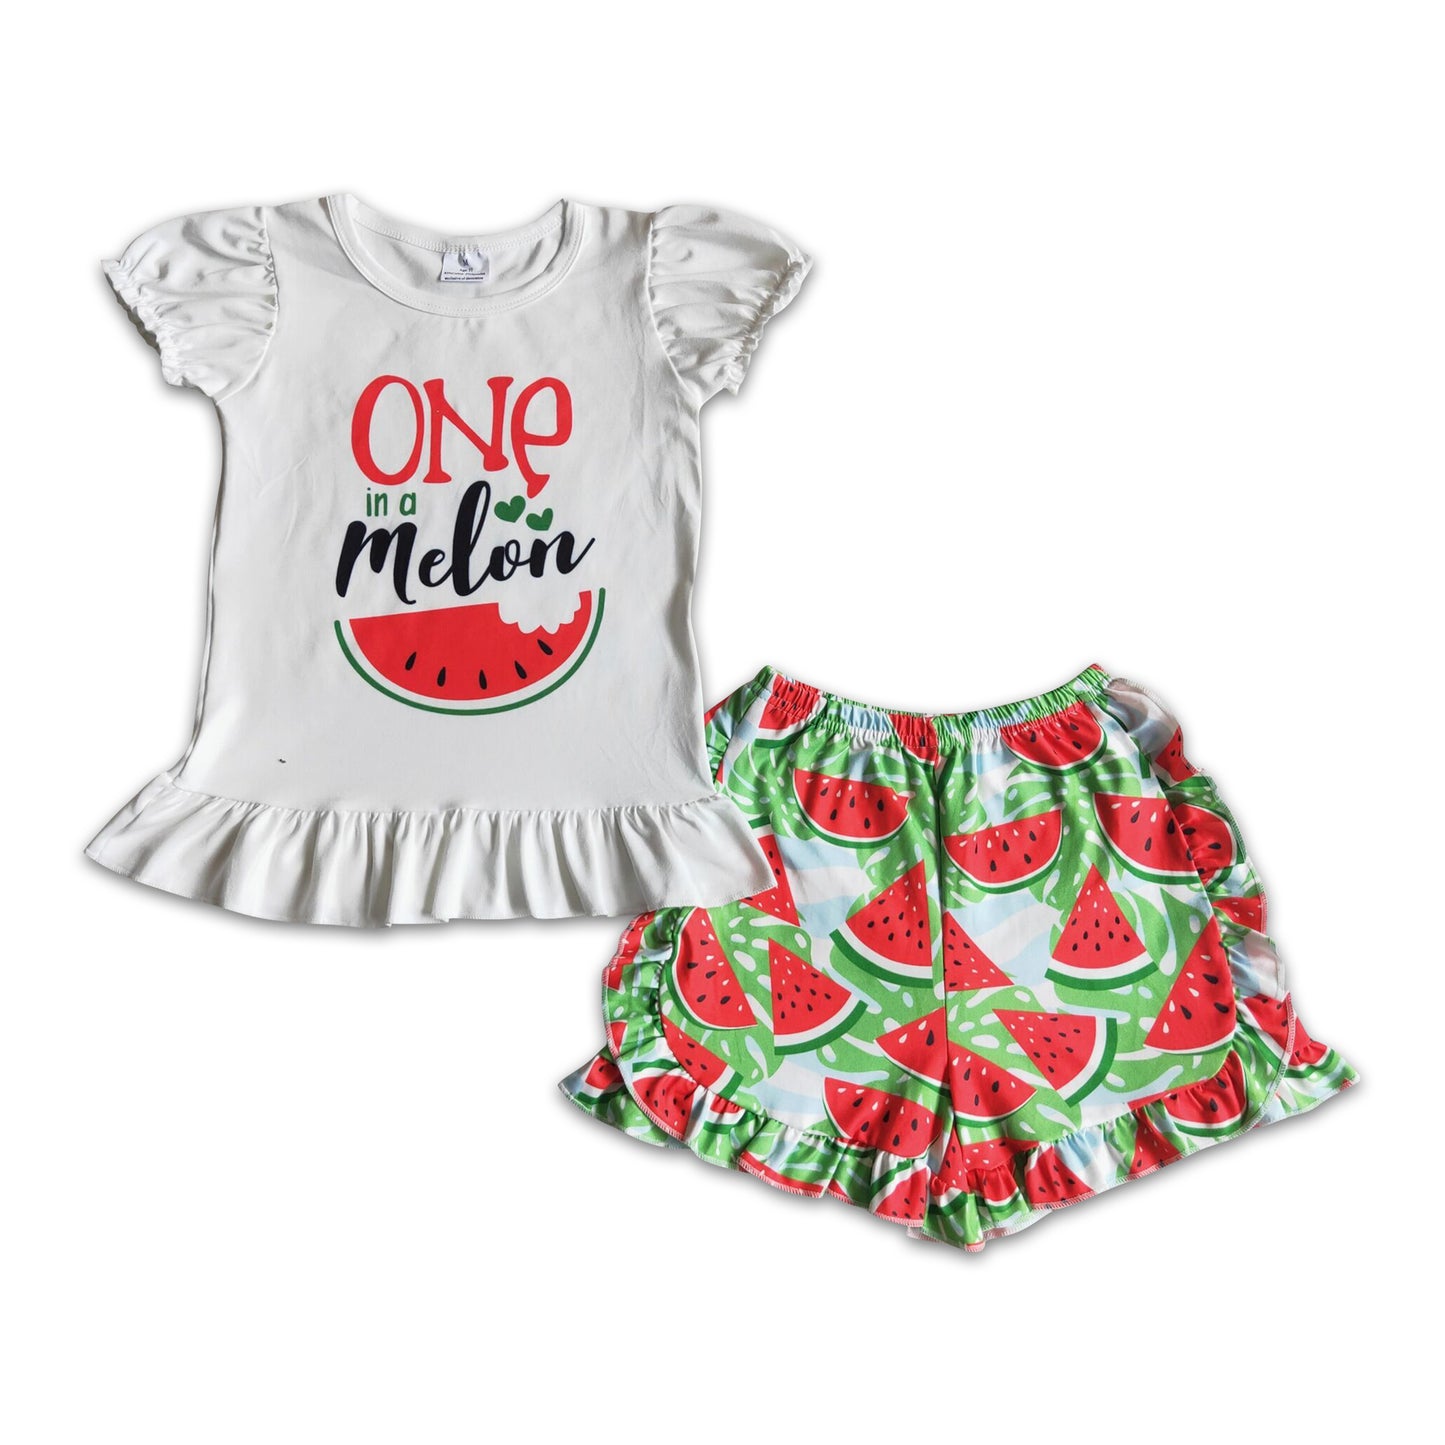 One in a melon white shirt watermelon shorts kids clothing girls